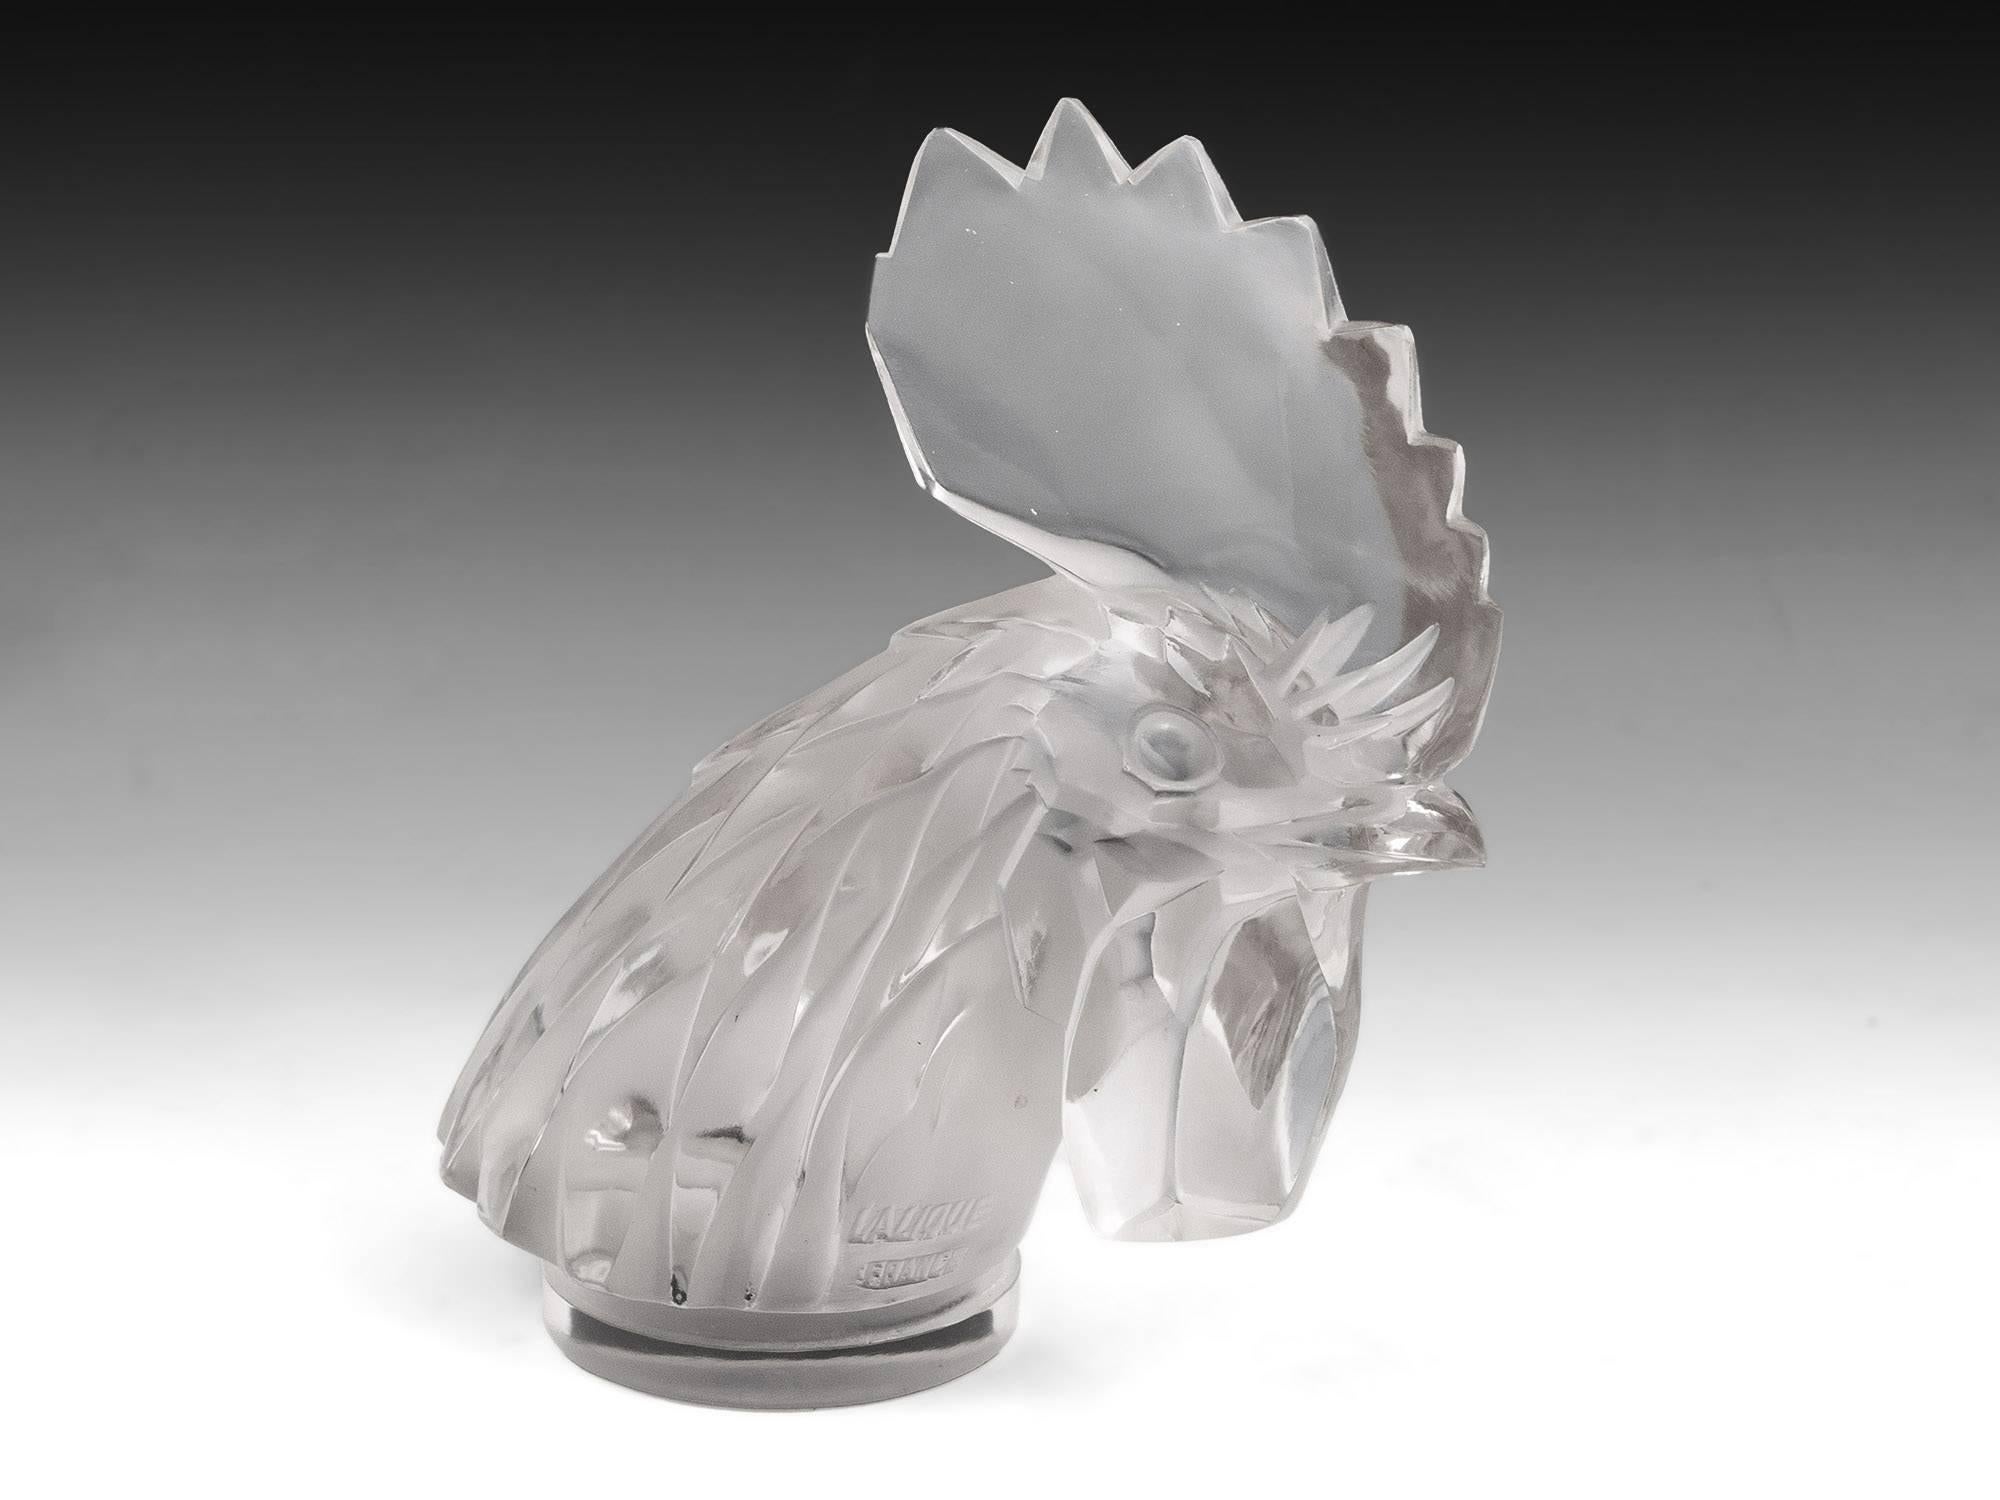 Lalique Tete de Coq / cockerel's head car mascot. Model number 1137 

These wonderful glass Lalique car mascots were originally made as car hood ornaments in the 1920's by famous glass make René Jules Lalique, who started a company using his own